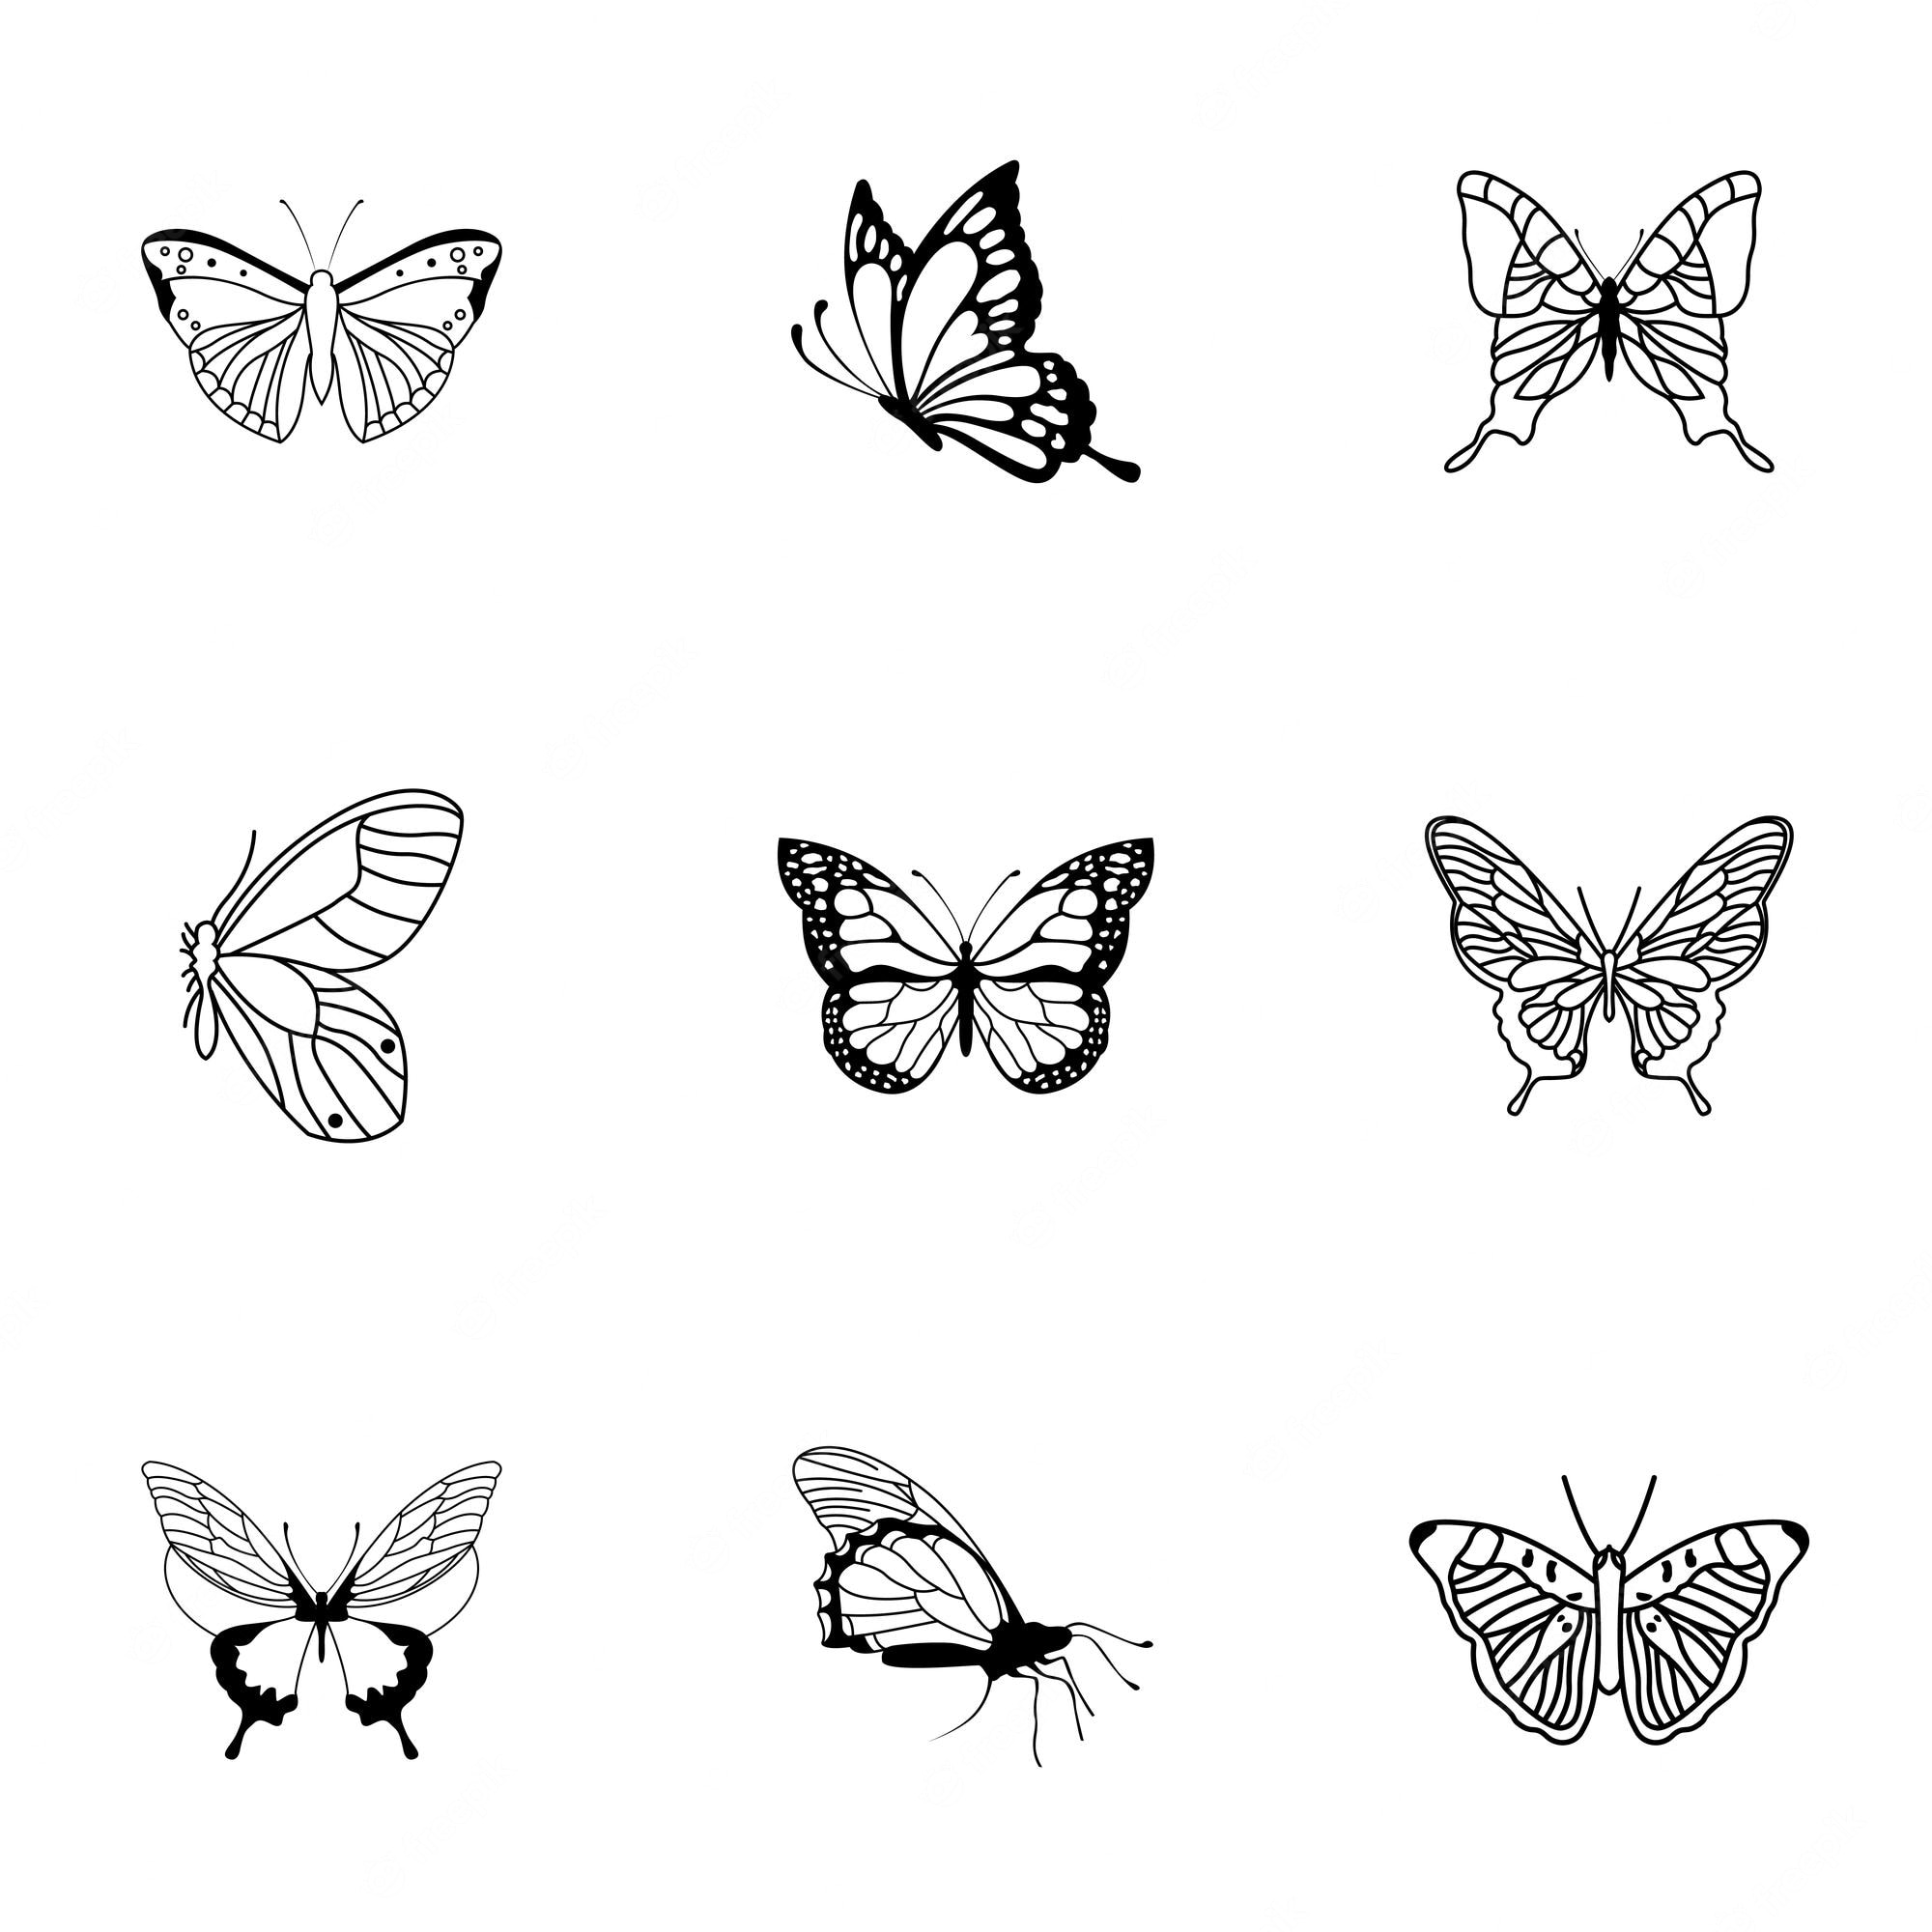 Butterfly Drawing Image. Free Vectors, & PSD